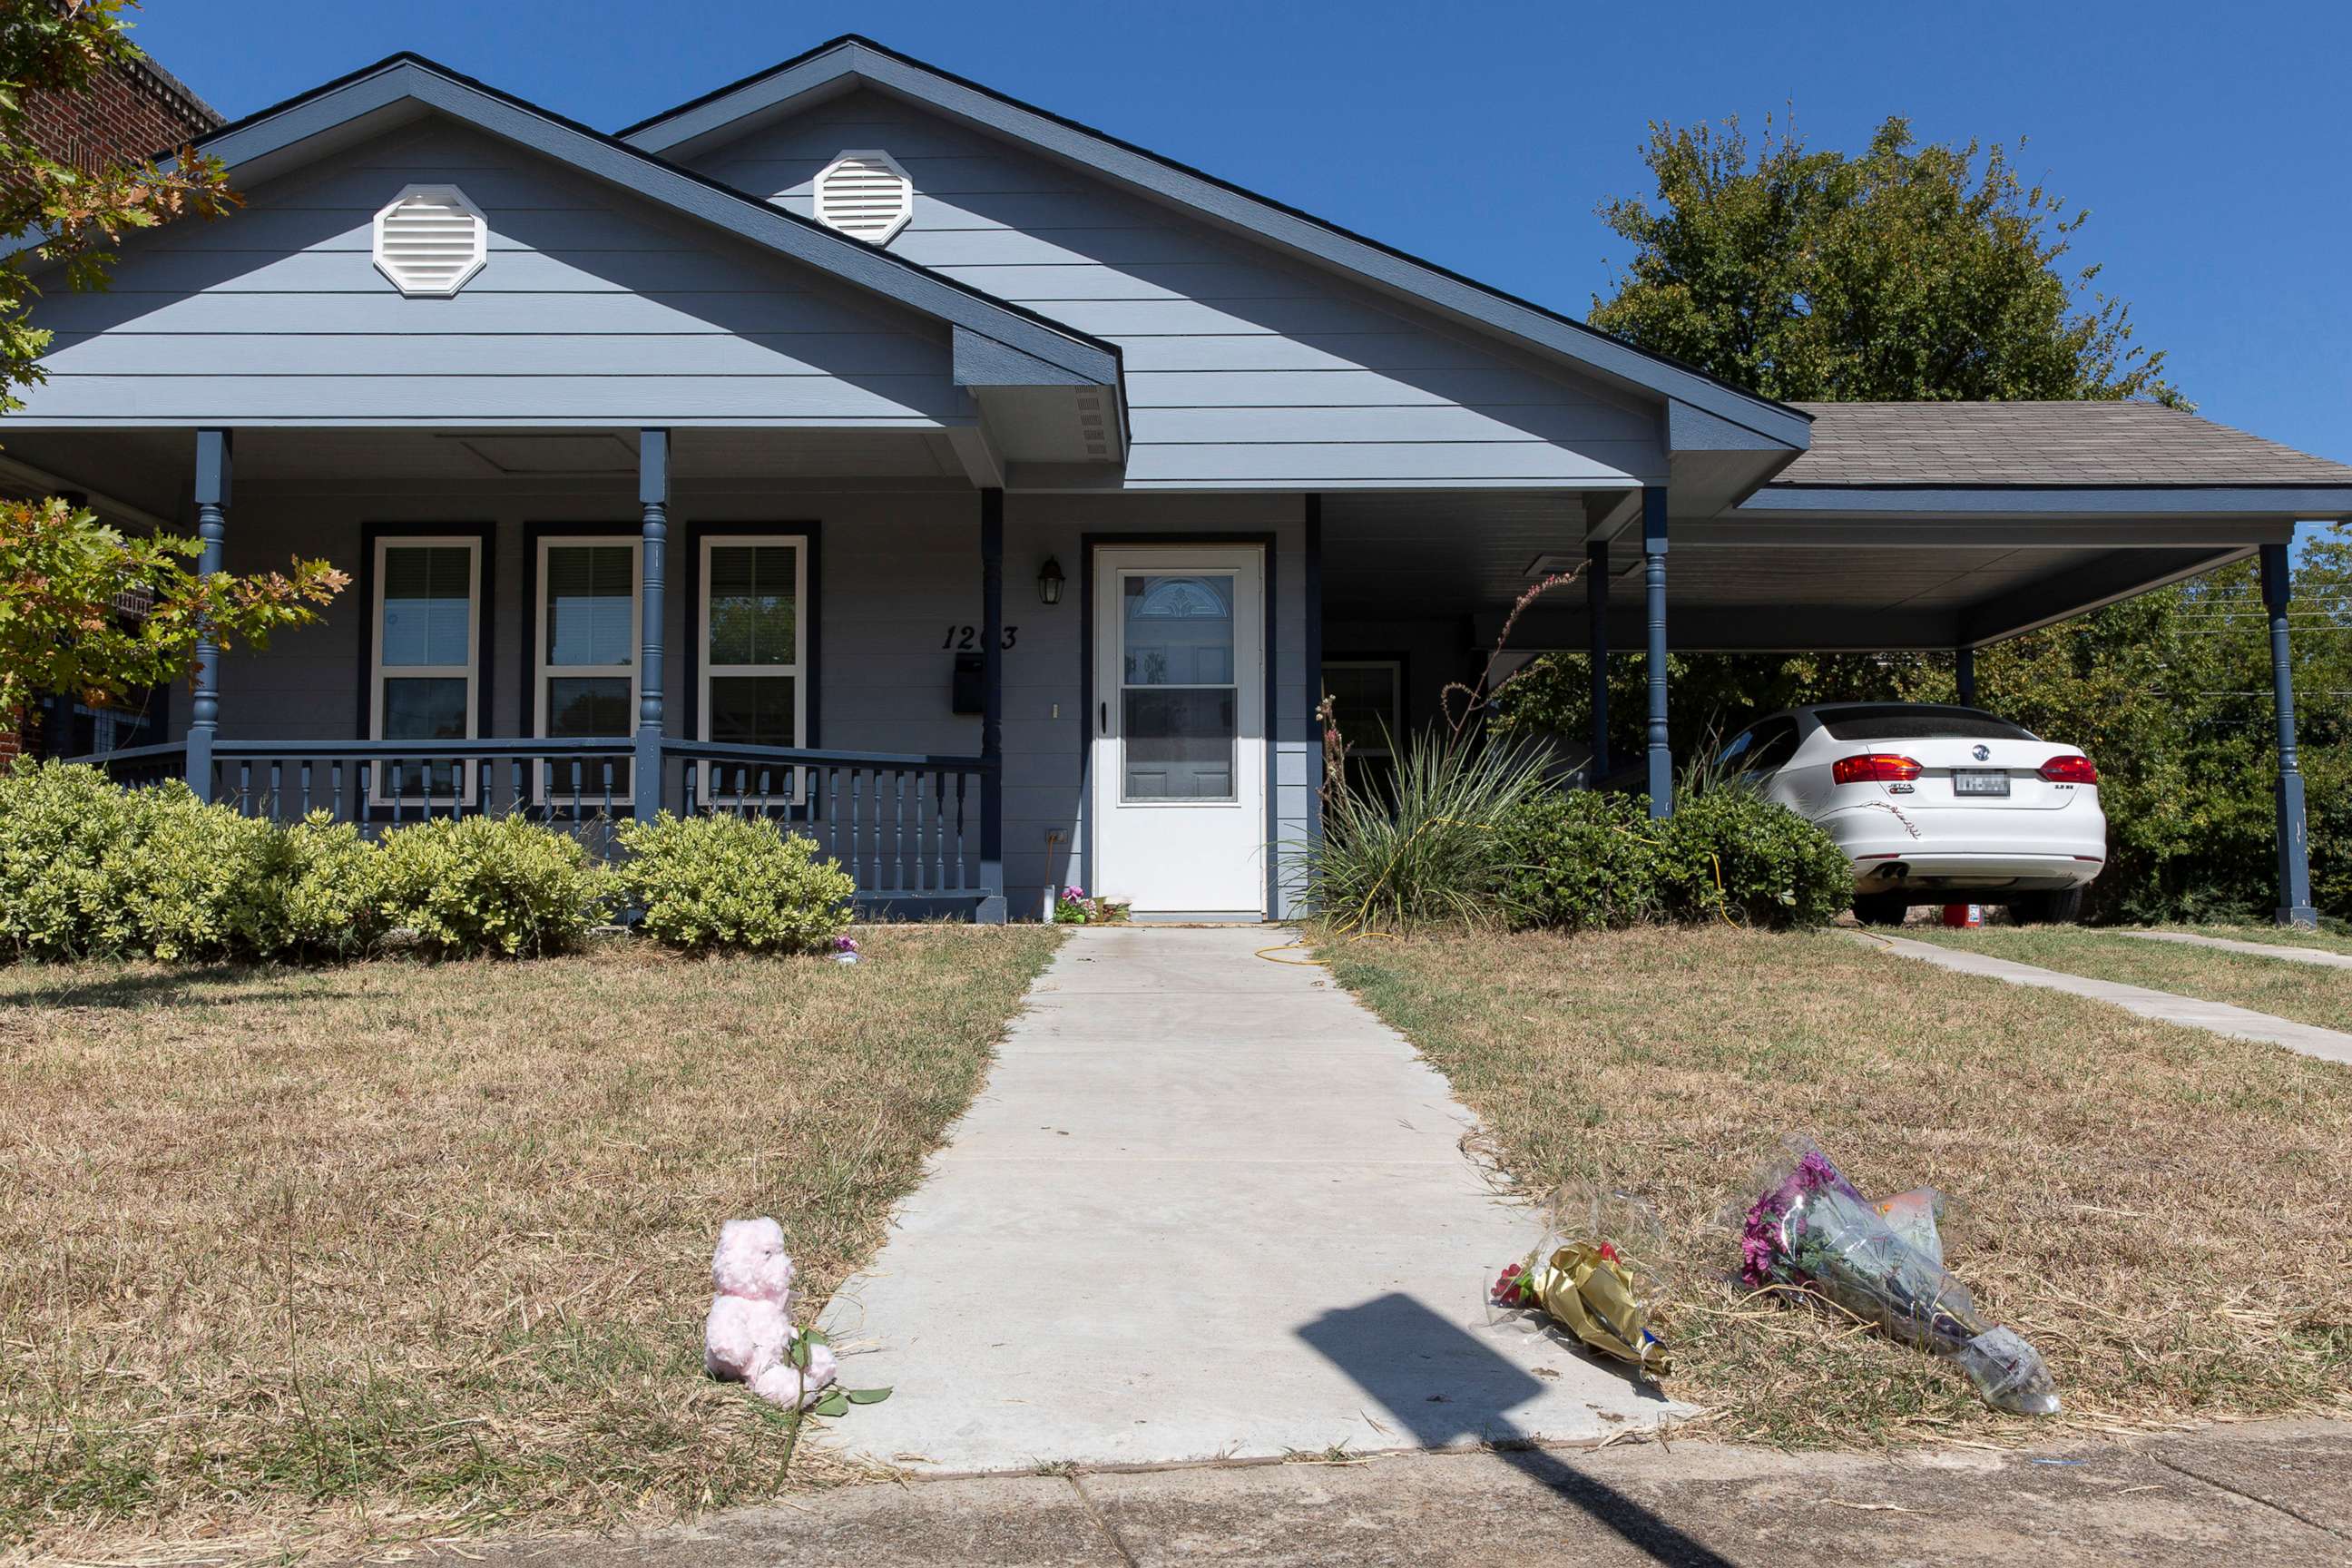 PHOTO: Flowers and a stuffed animal lay on the ground outside of the home where Atatiana Jefferson was killed early Saturday by a police officer, in Fort Worth, Texas, Oct. 13, 2019.